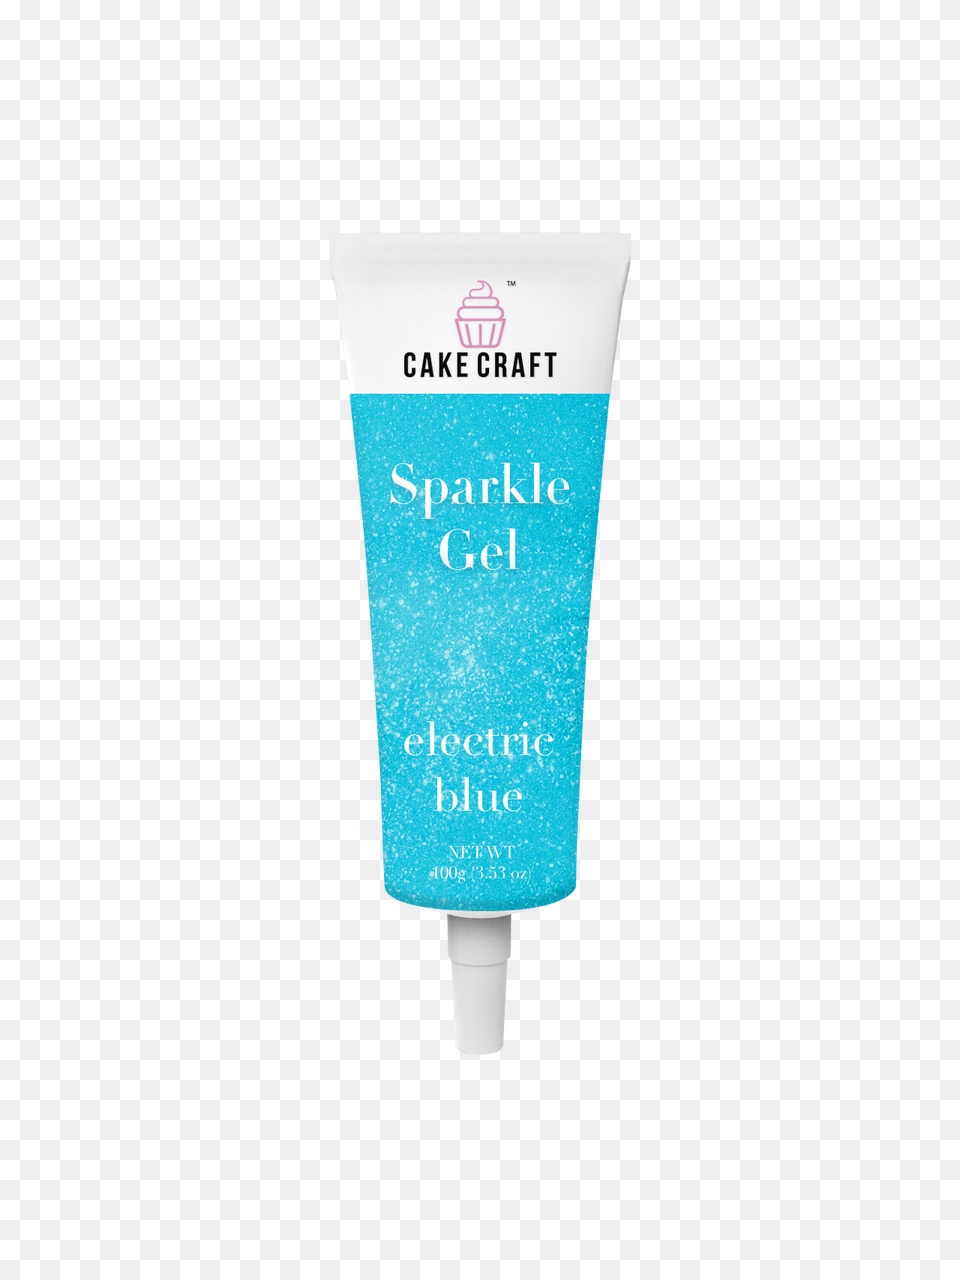 Cake Decorating Supplies Manufacturer, Bottle, Lotion, Cosmetics Png Image